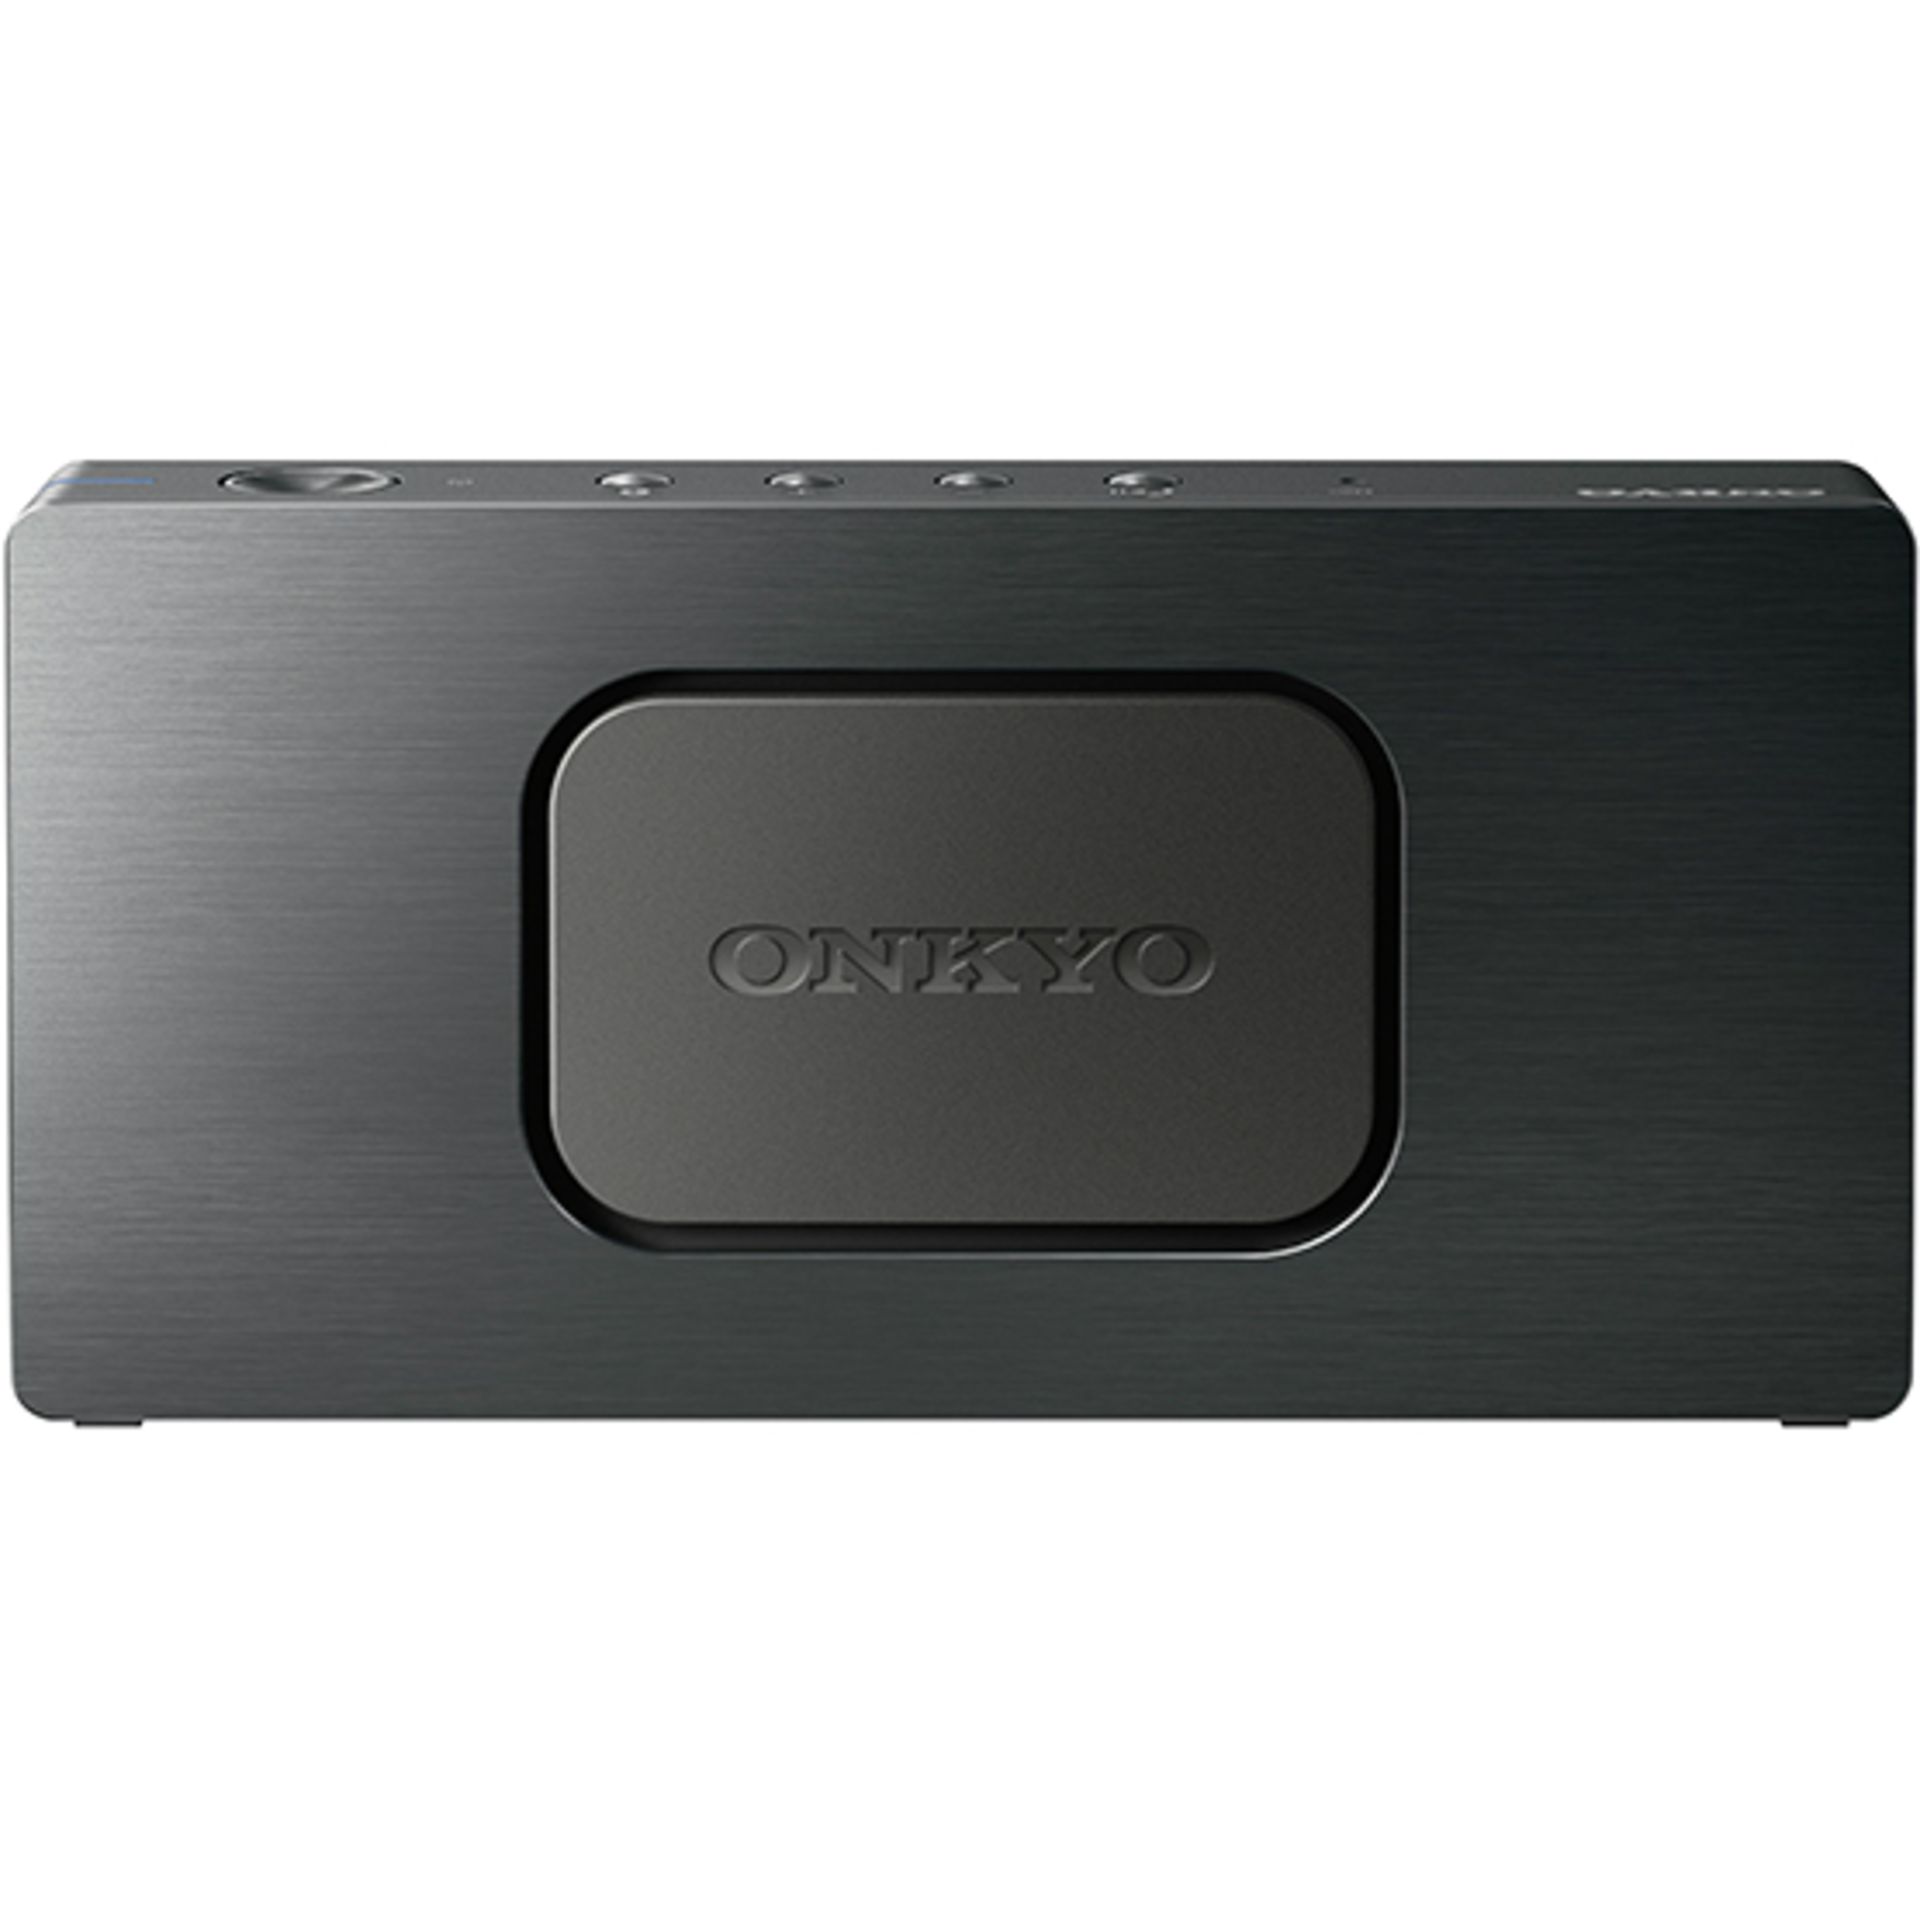 V *TRADE QTY* Brand New Onkyo T3 Lightweight Portable Bluetooth Speaker with USB output for Charging - Image 2 of 4